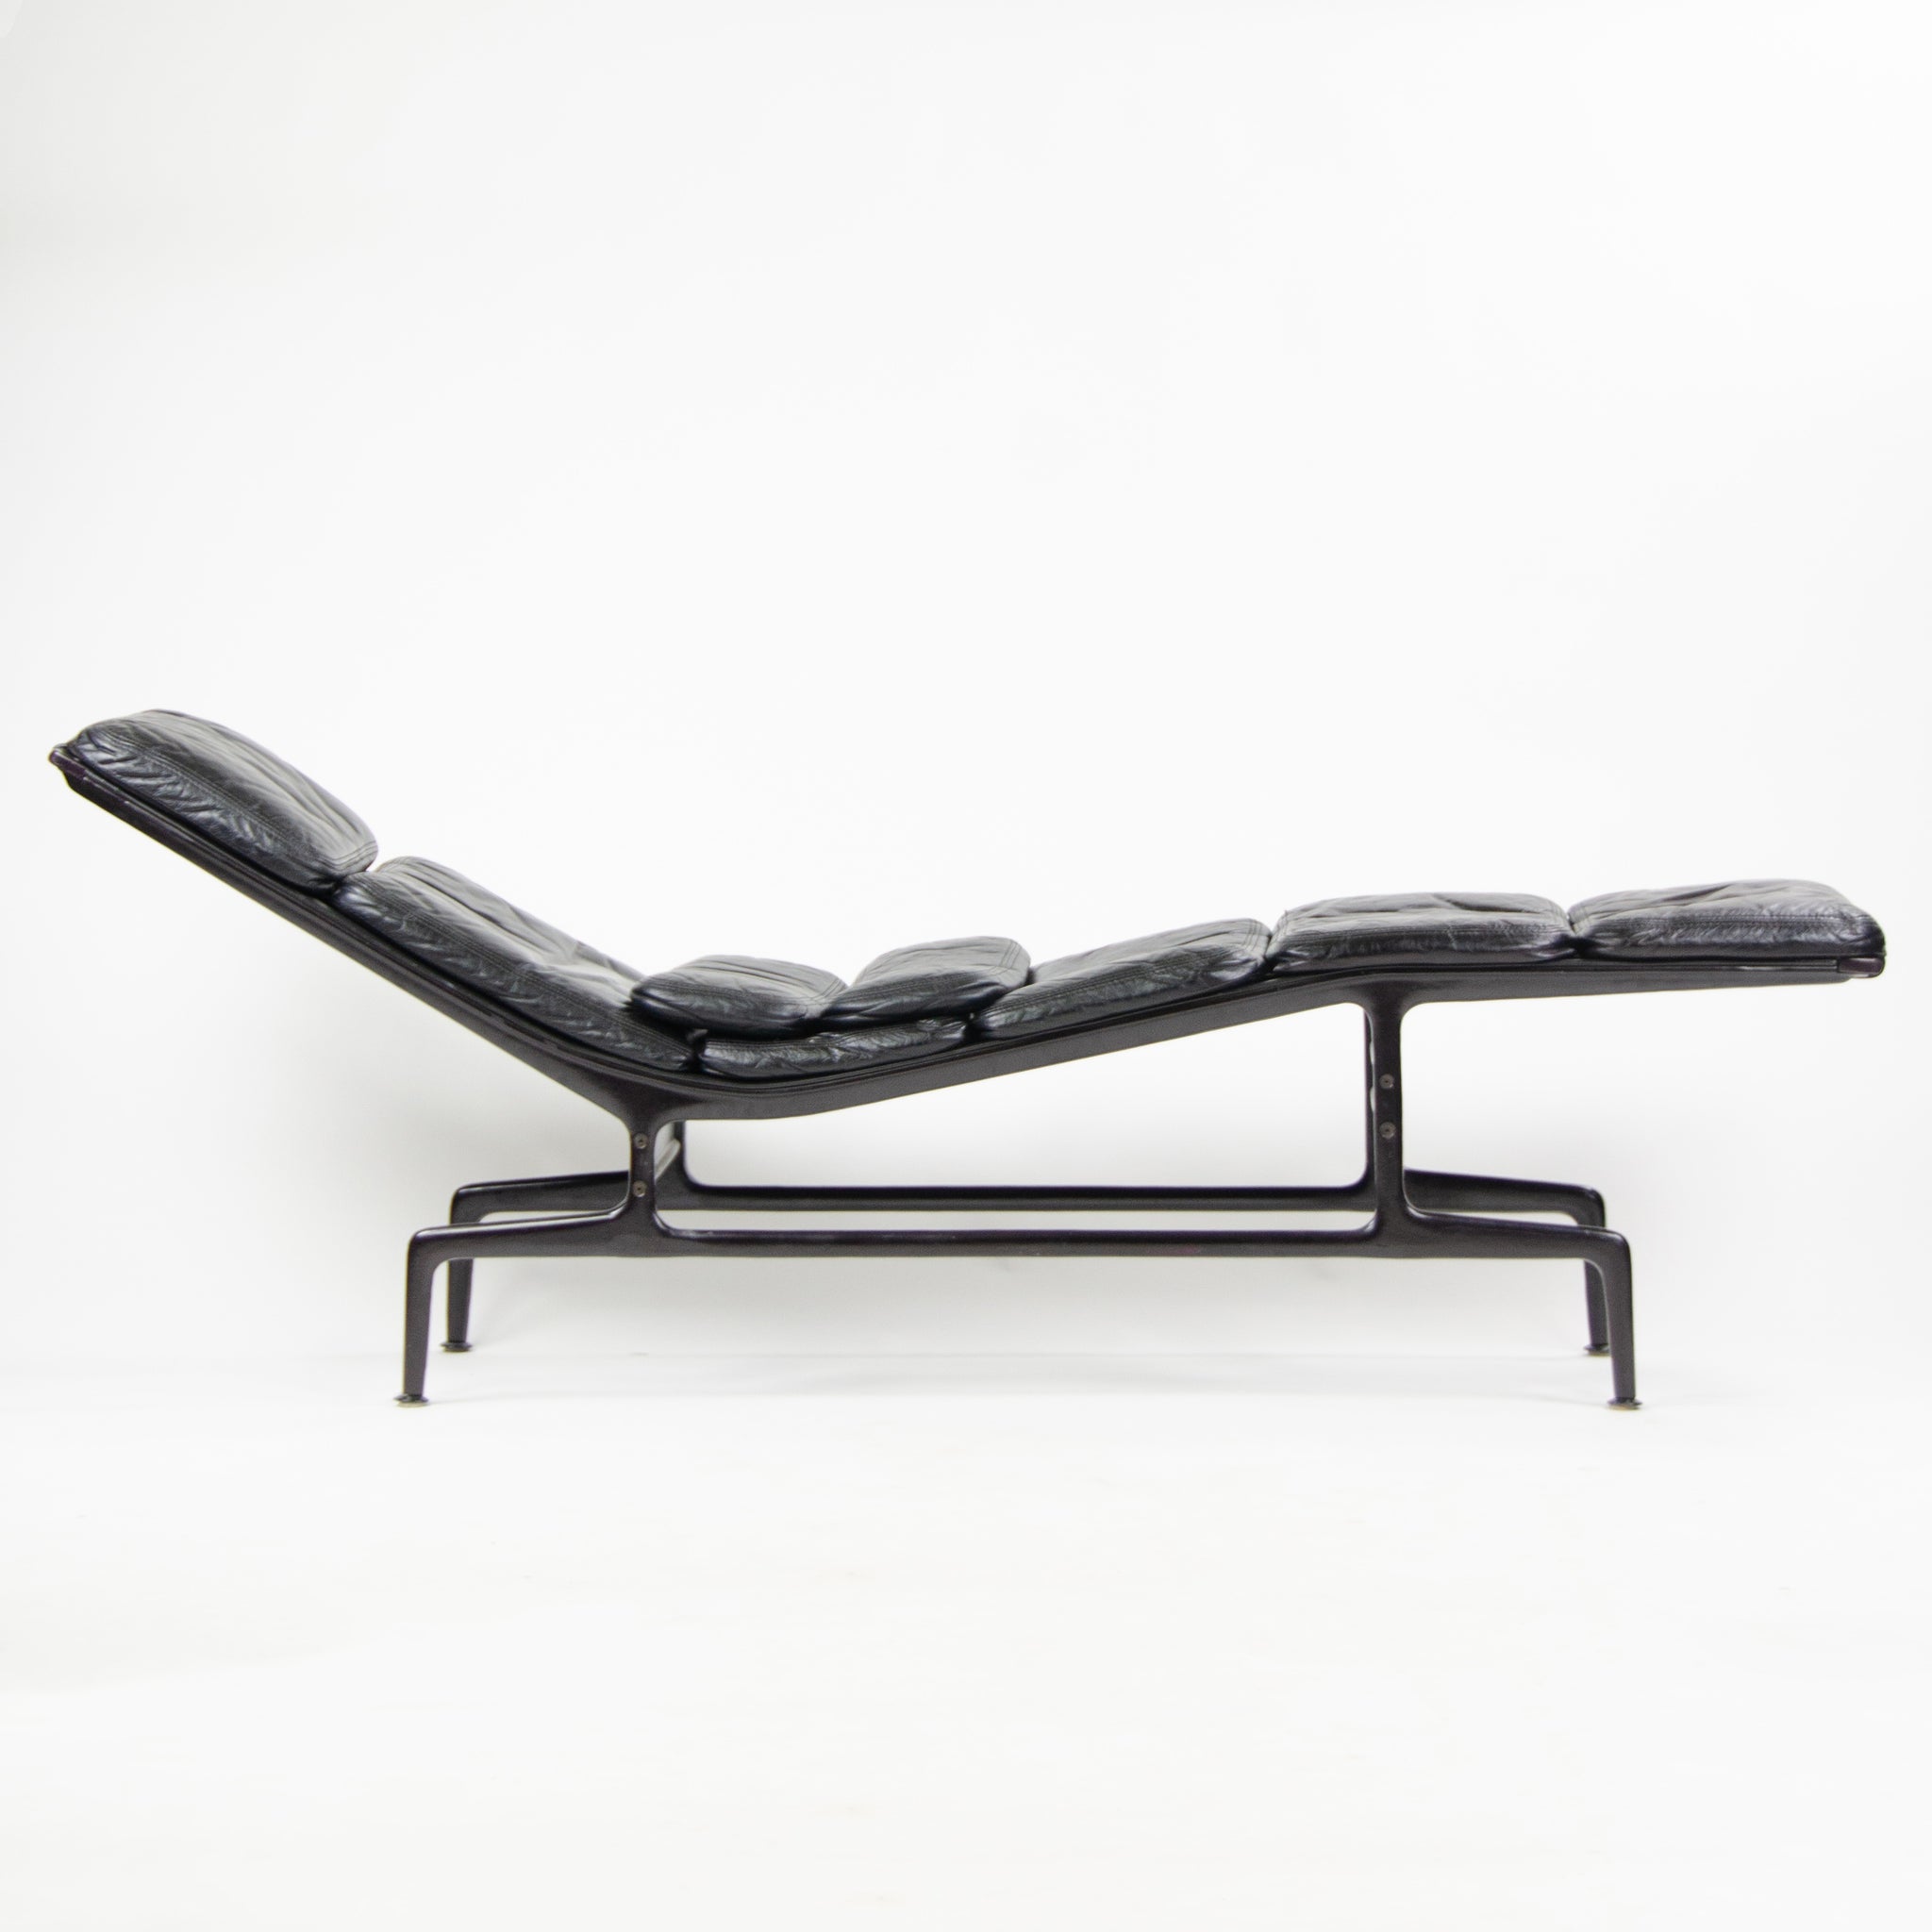 SOLD 1970's Eames Herman Miller Billy Wilder Black and Eggplant Chaise Lounge Chair